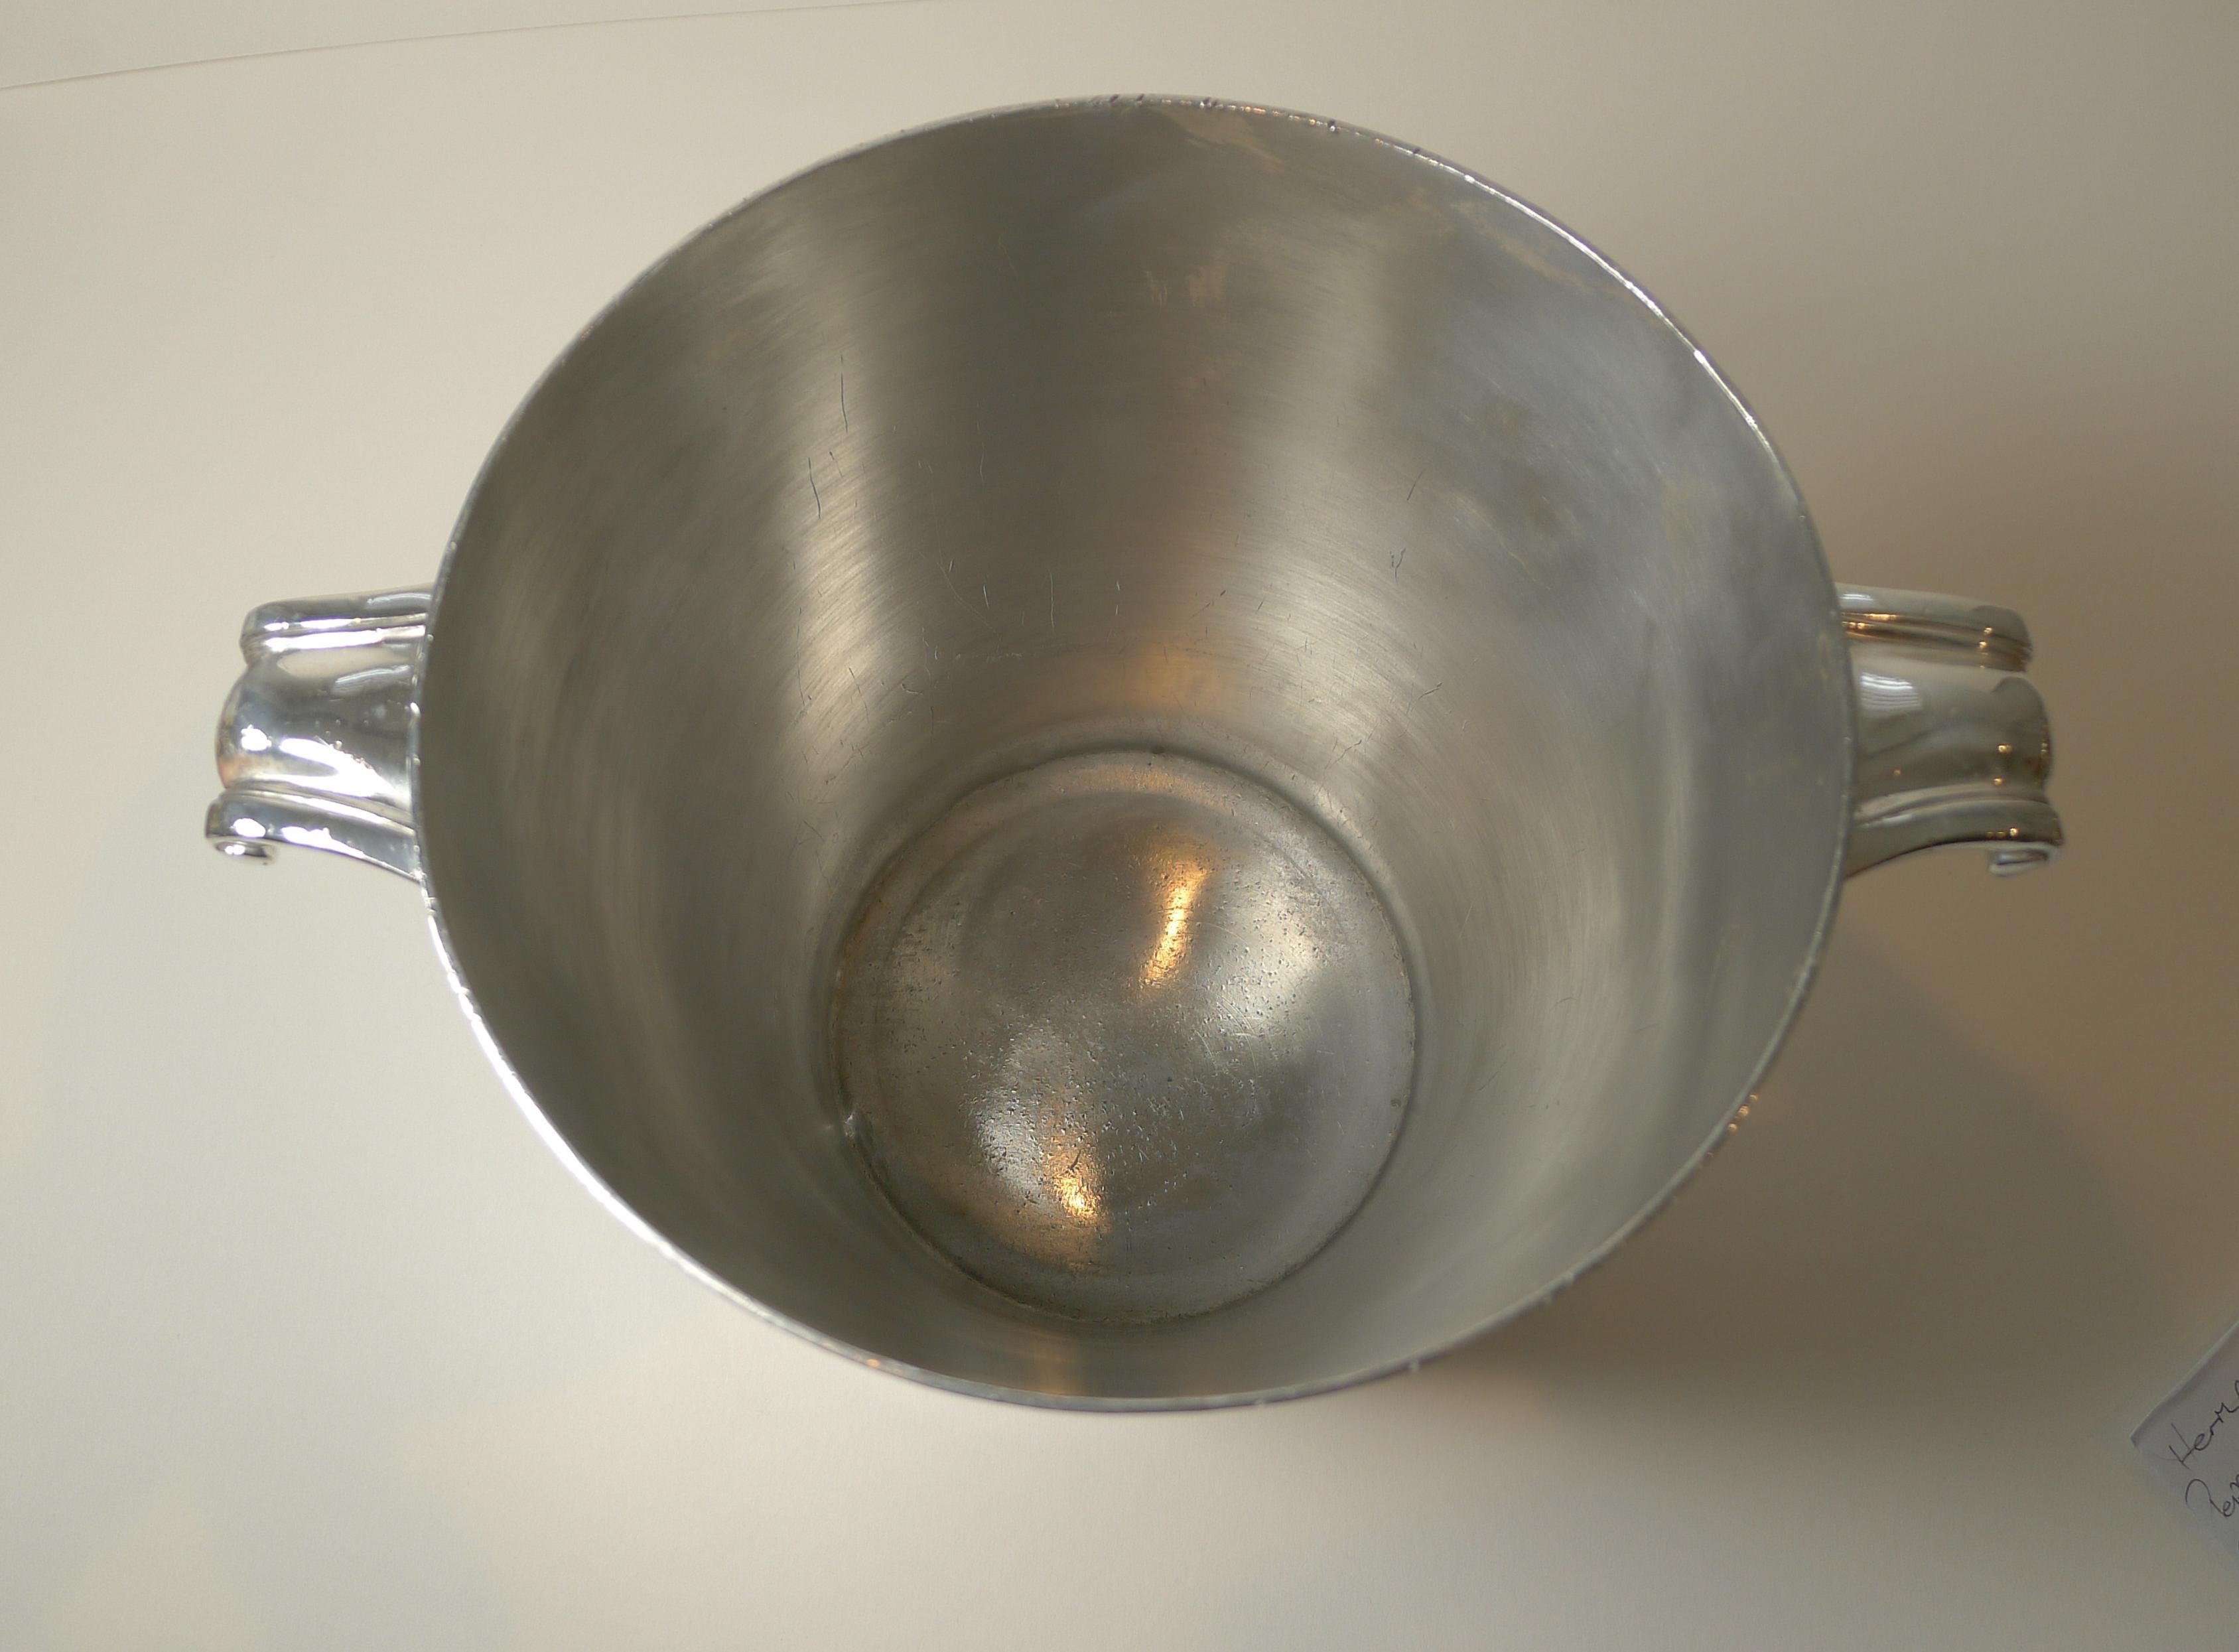 Art Deco Silver Plated Wine Cooler / Champagne Bucket by Wiskemann, Belgium c.1930